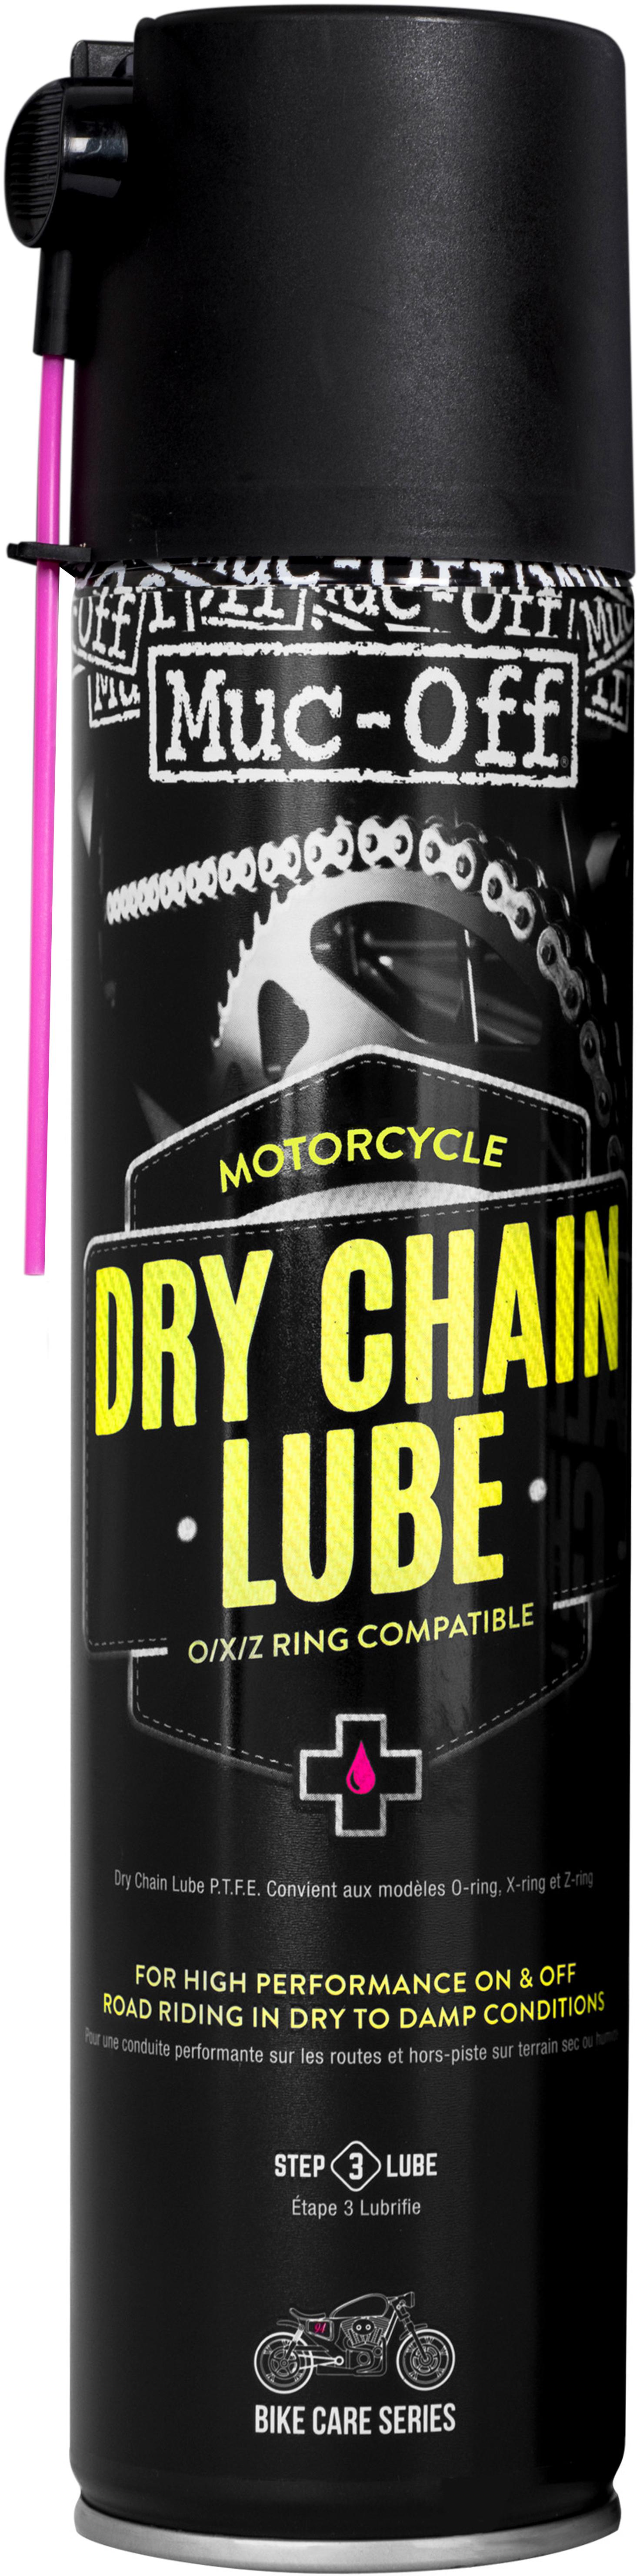 Muc-Off Motorcycle Dry Chain Lube  - 400Ml